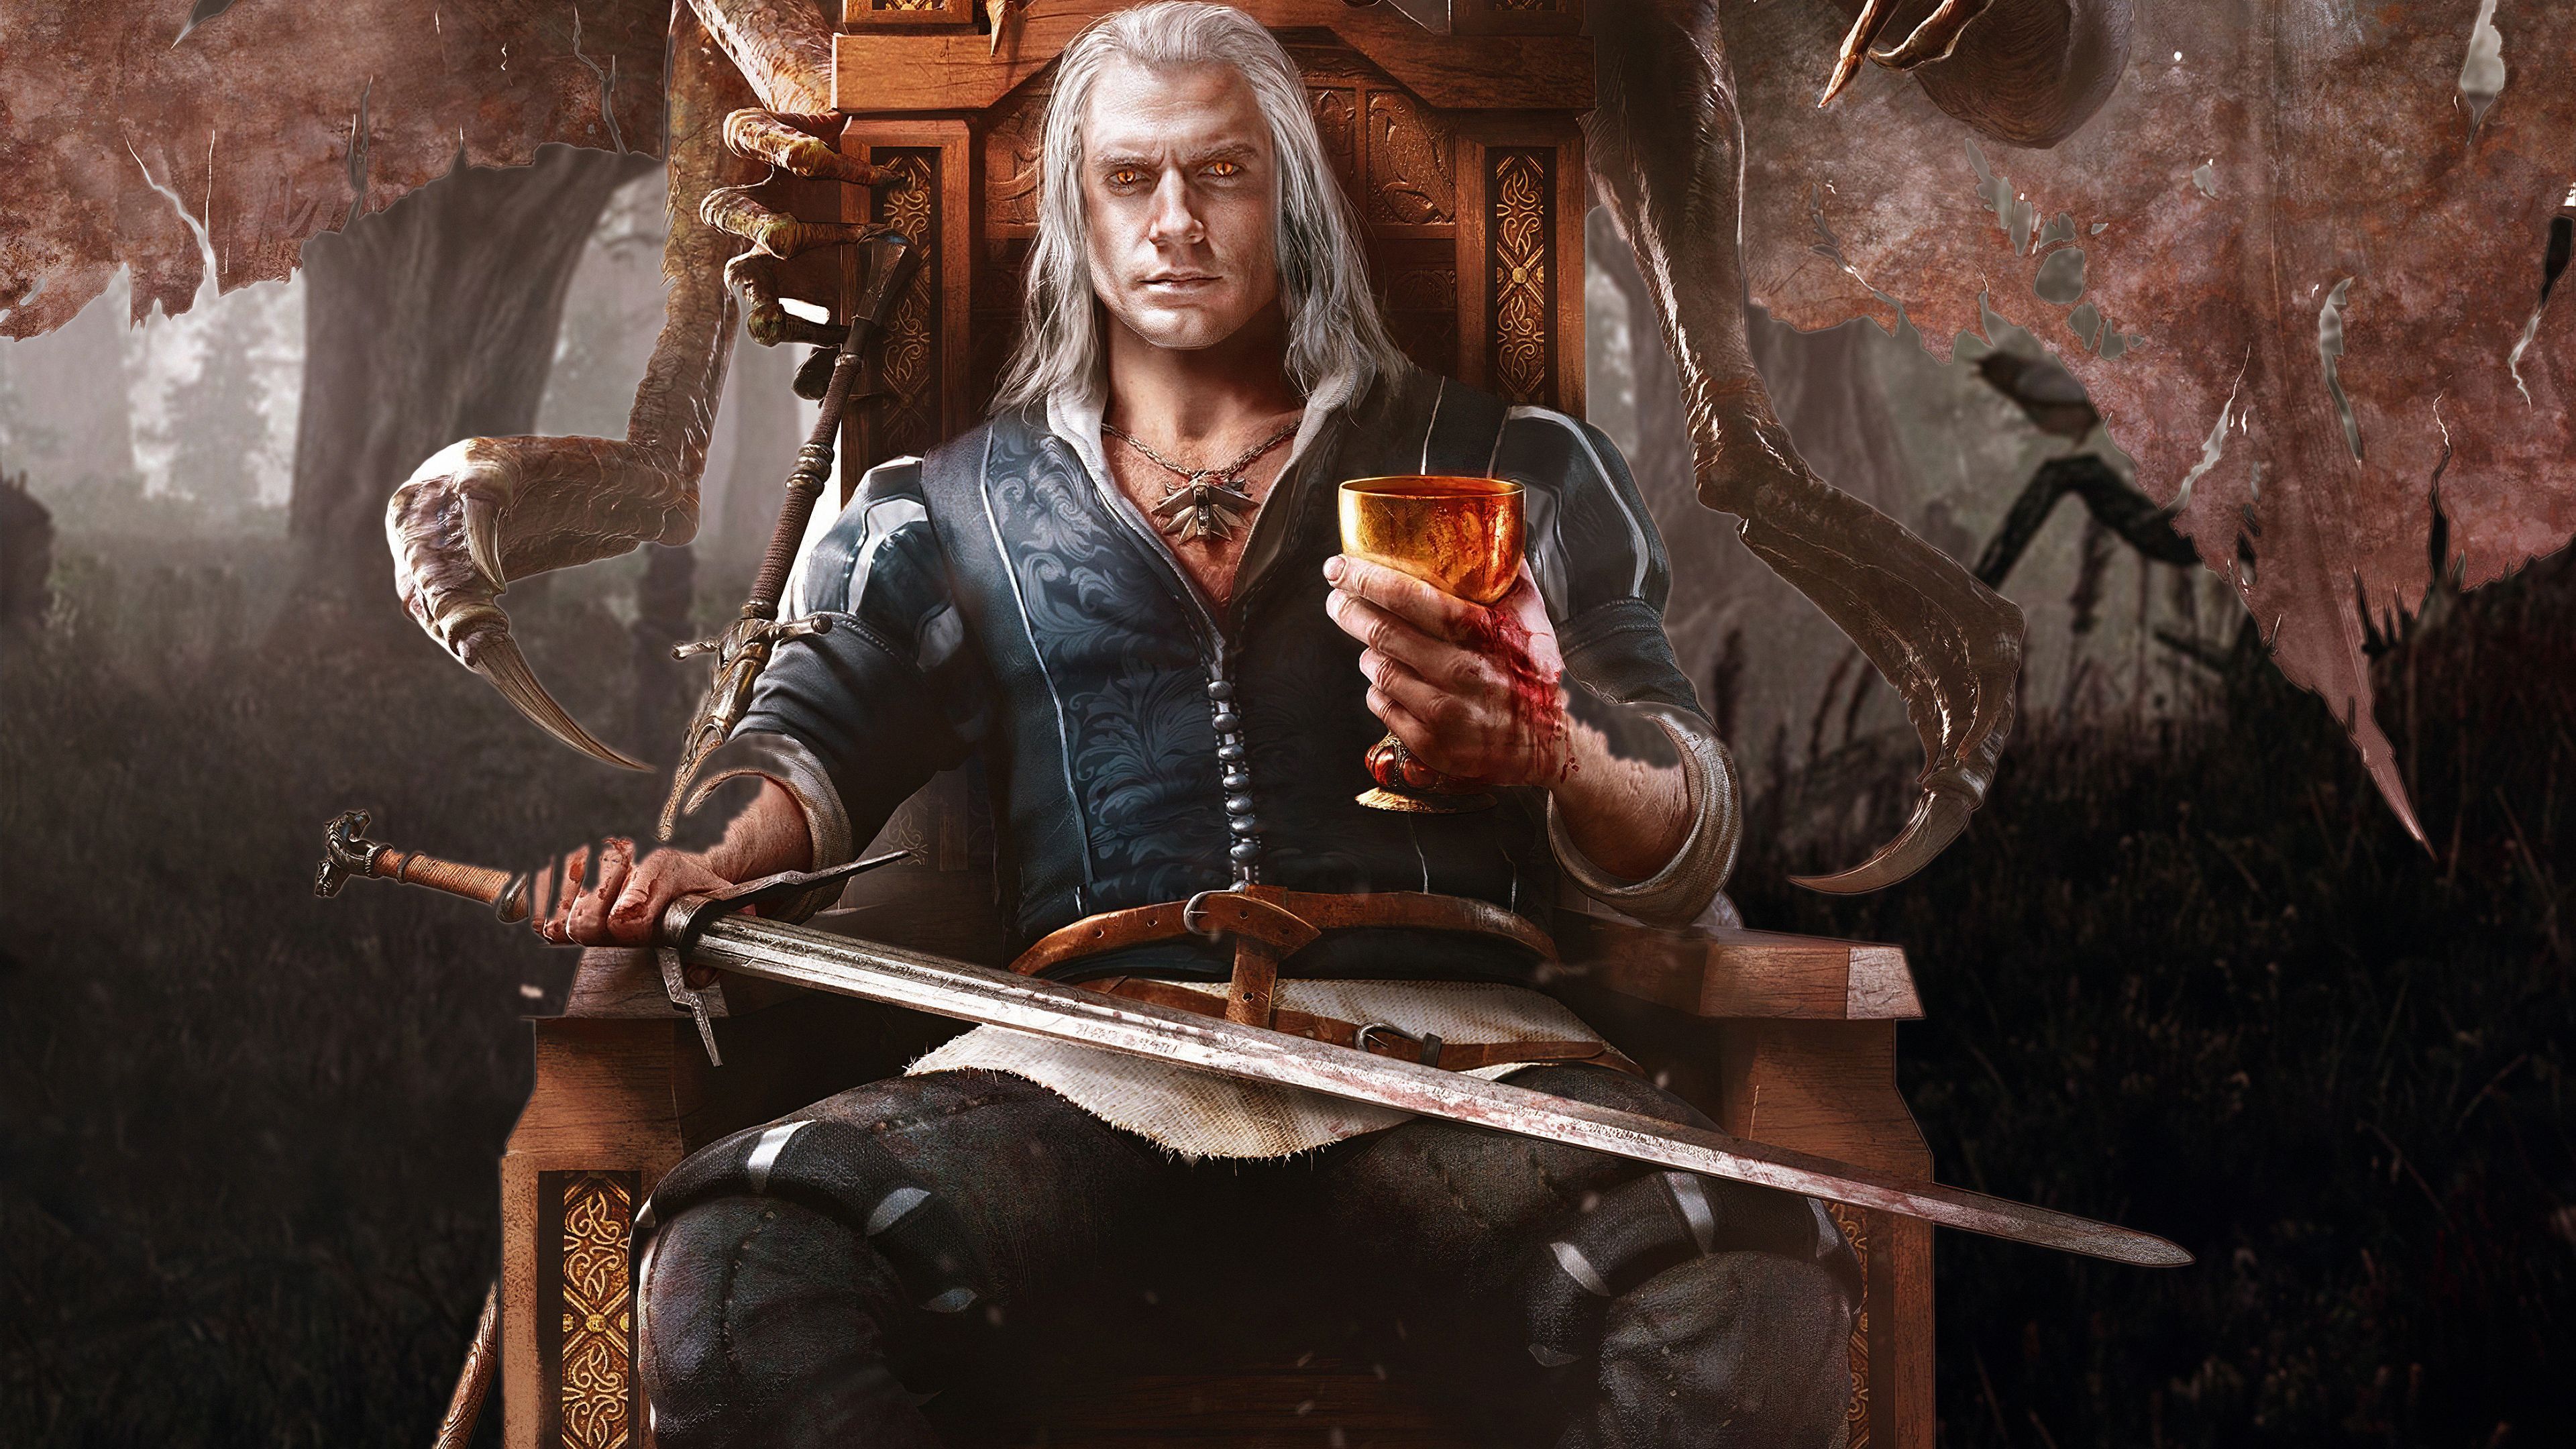 Wicther Henry Art The Witcher HD wallpaper, The Witcher background HD 4k, The Witcher 4k wallpaper. HD wallpaper, The witcher, Art